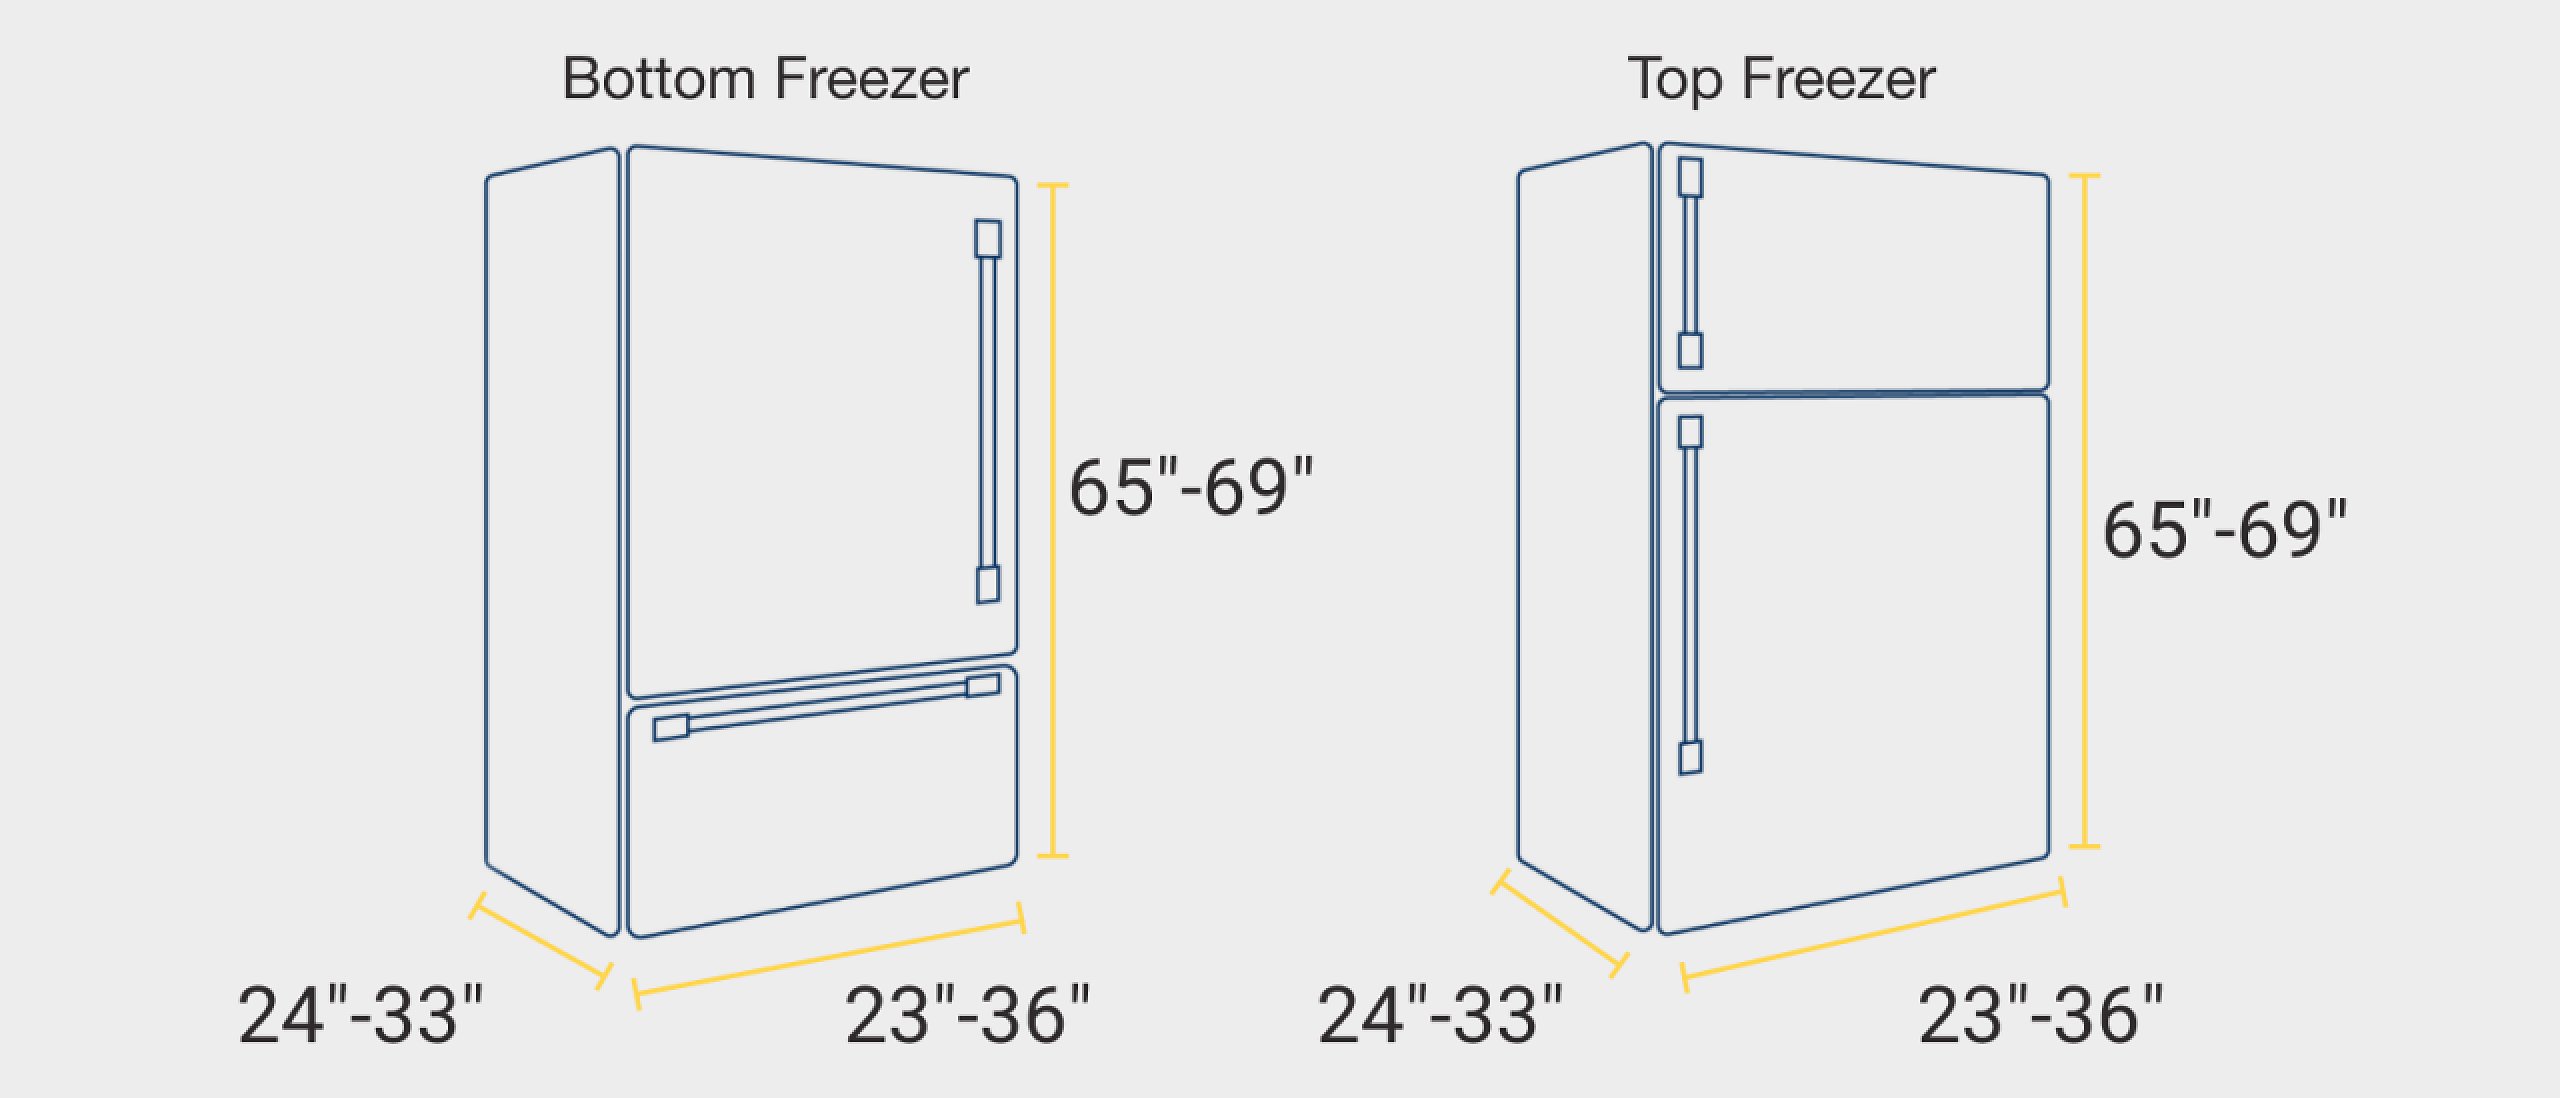 Refrigerator Sizes A Guide to Measuring Fridge Dimensions Maytag